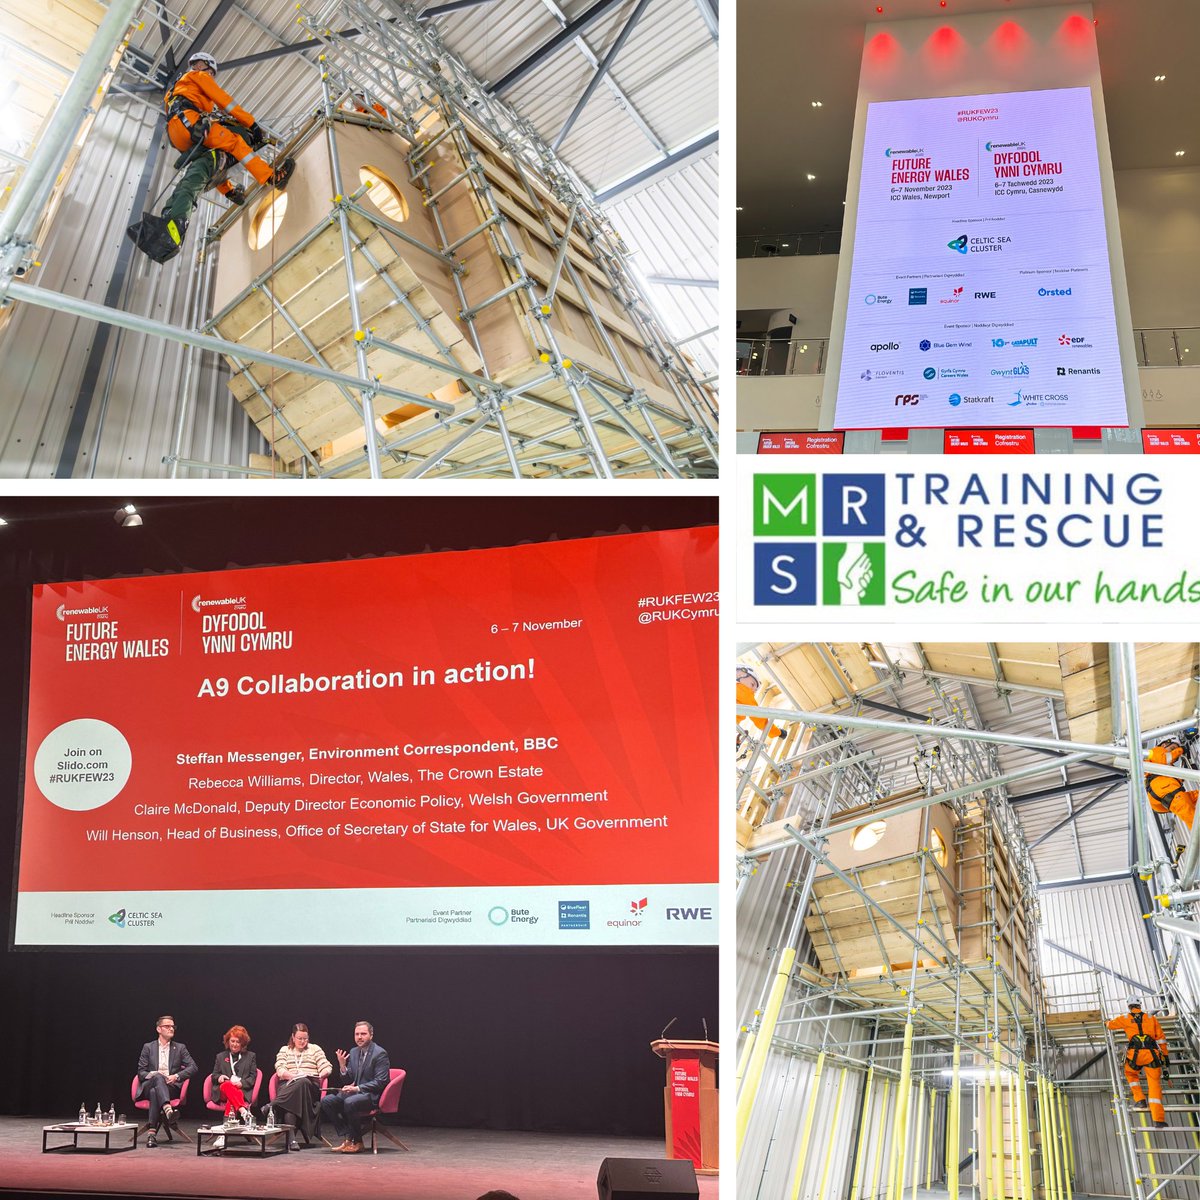 Yesterday we visited the Future Energy Wales #RUKFEW23 conference. We are opening a new purpose-built wind turbine training facility at our centre in South Wales to help significantly bolster the region’s skills across the wind energy sector. 
#futureenergywales #onshoretraining